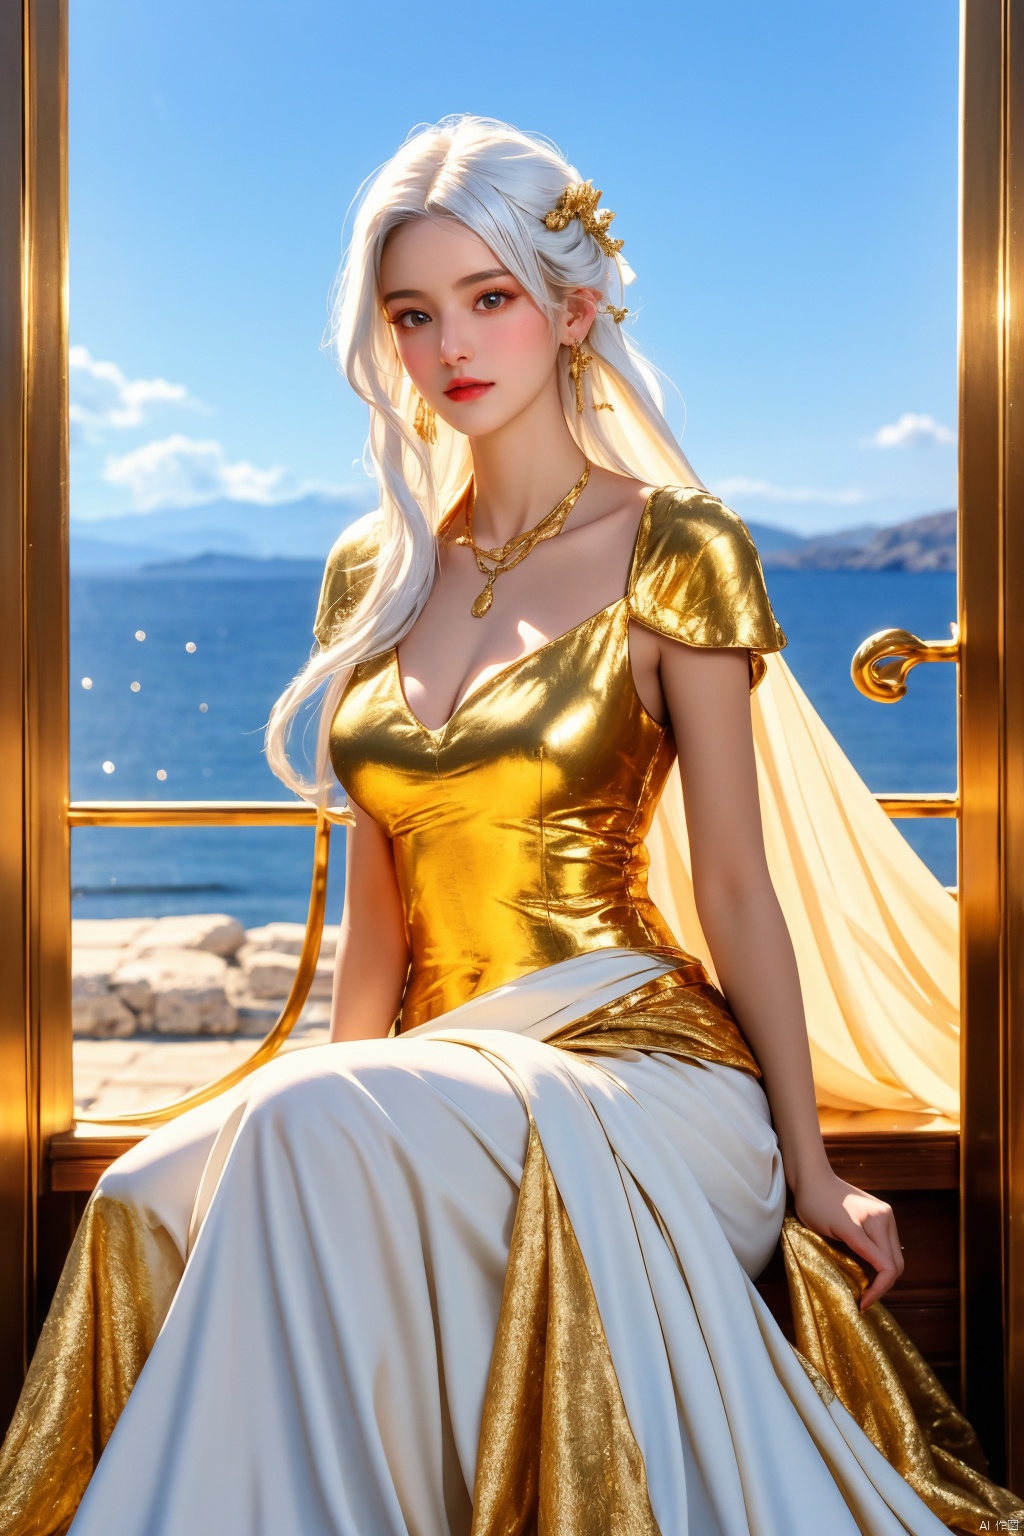 masterpiece, 1 girl, Look at me, Aphrodite, White hair, Greek dress, Palace, Sitting on the throne, resplendent, Lots of roses, gilded, MYTHOS, Gold powder, Golden glow, textured skin, super detail, best quality, 16k, Blue sky outside the window